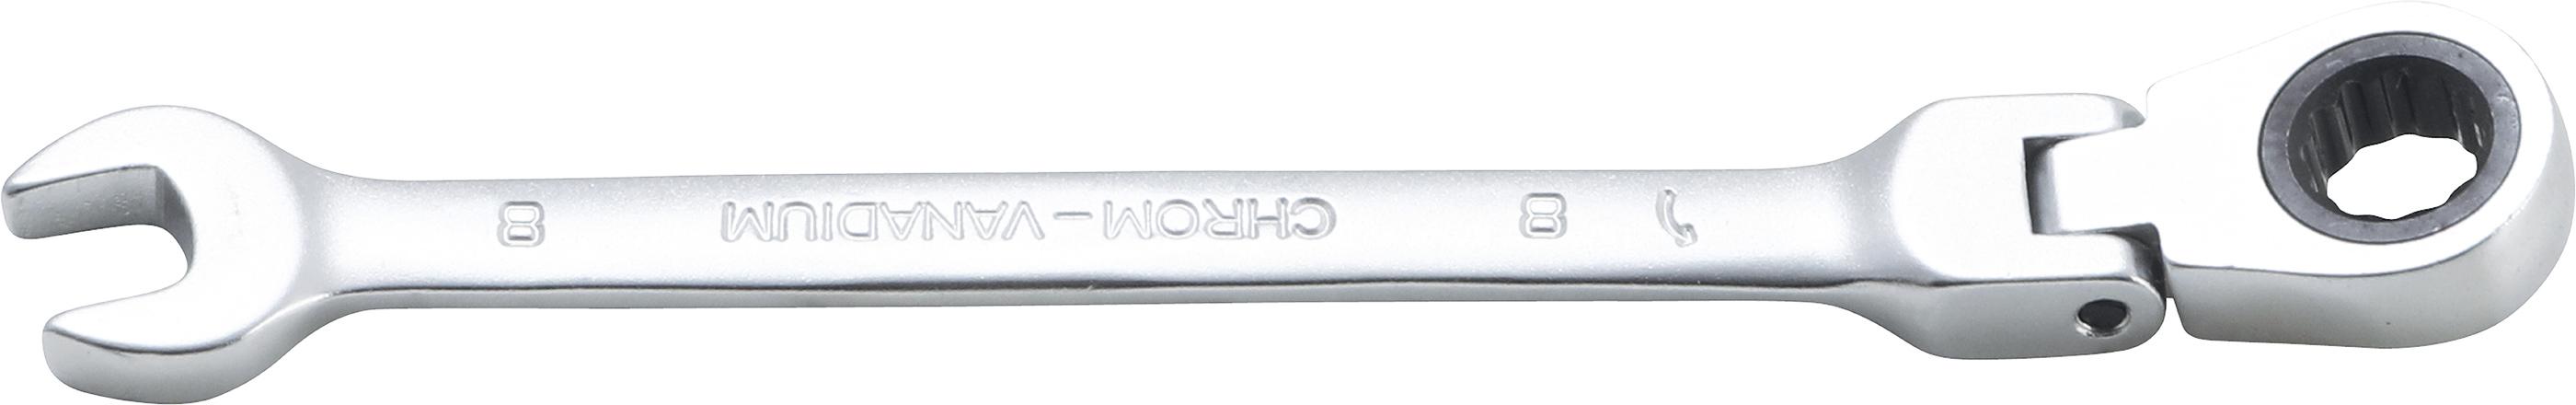 Ratchet Combination Wrench | adjustable | 8 mm (6708)